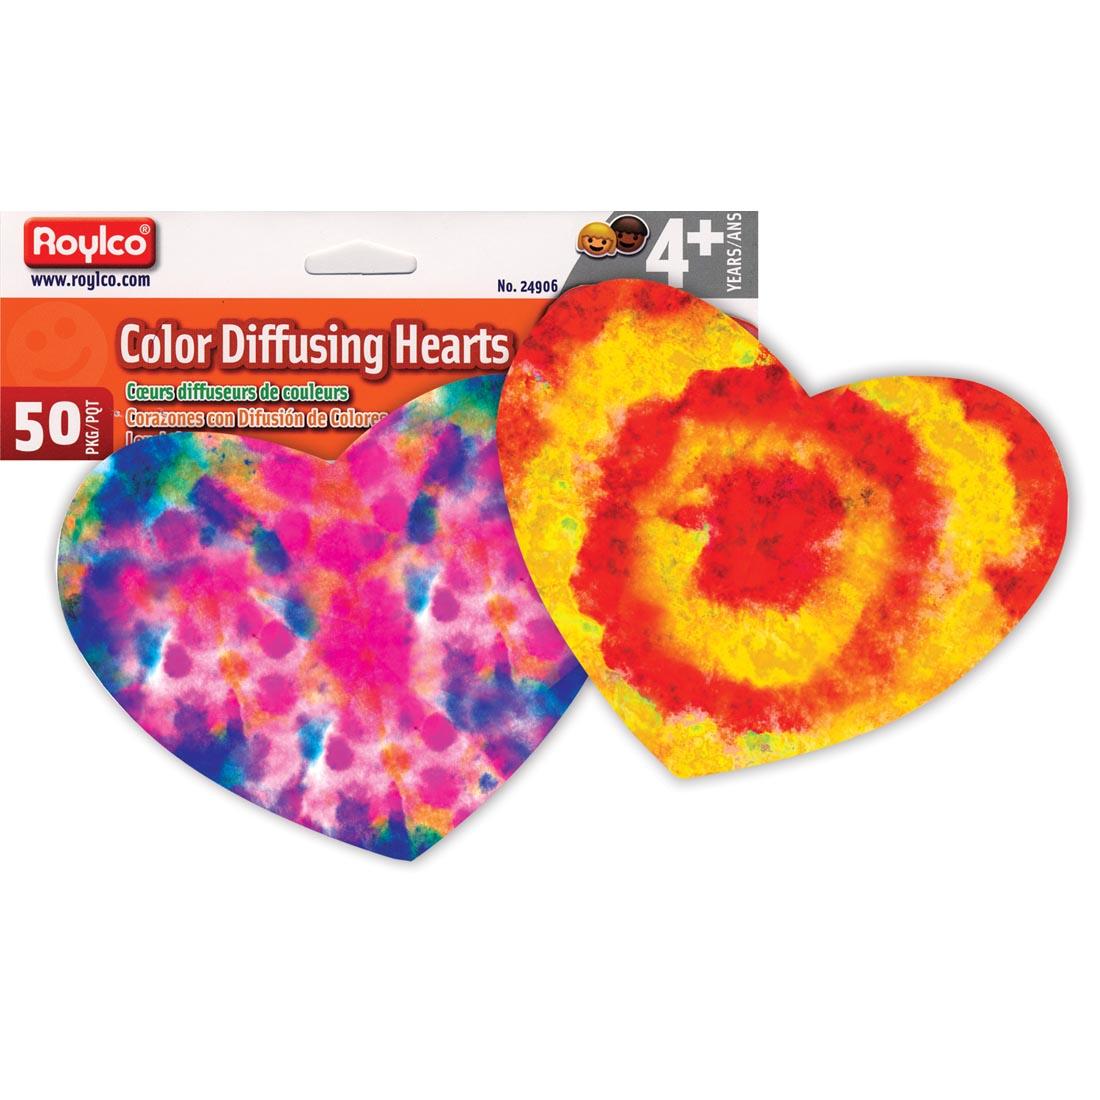 Roylco Color Diffusing Hearts shown already painted